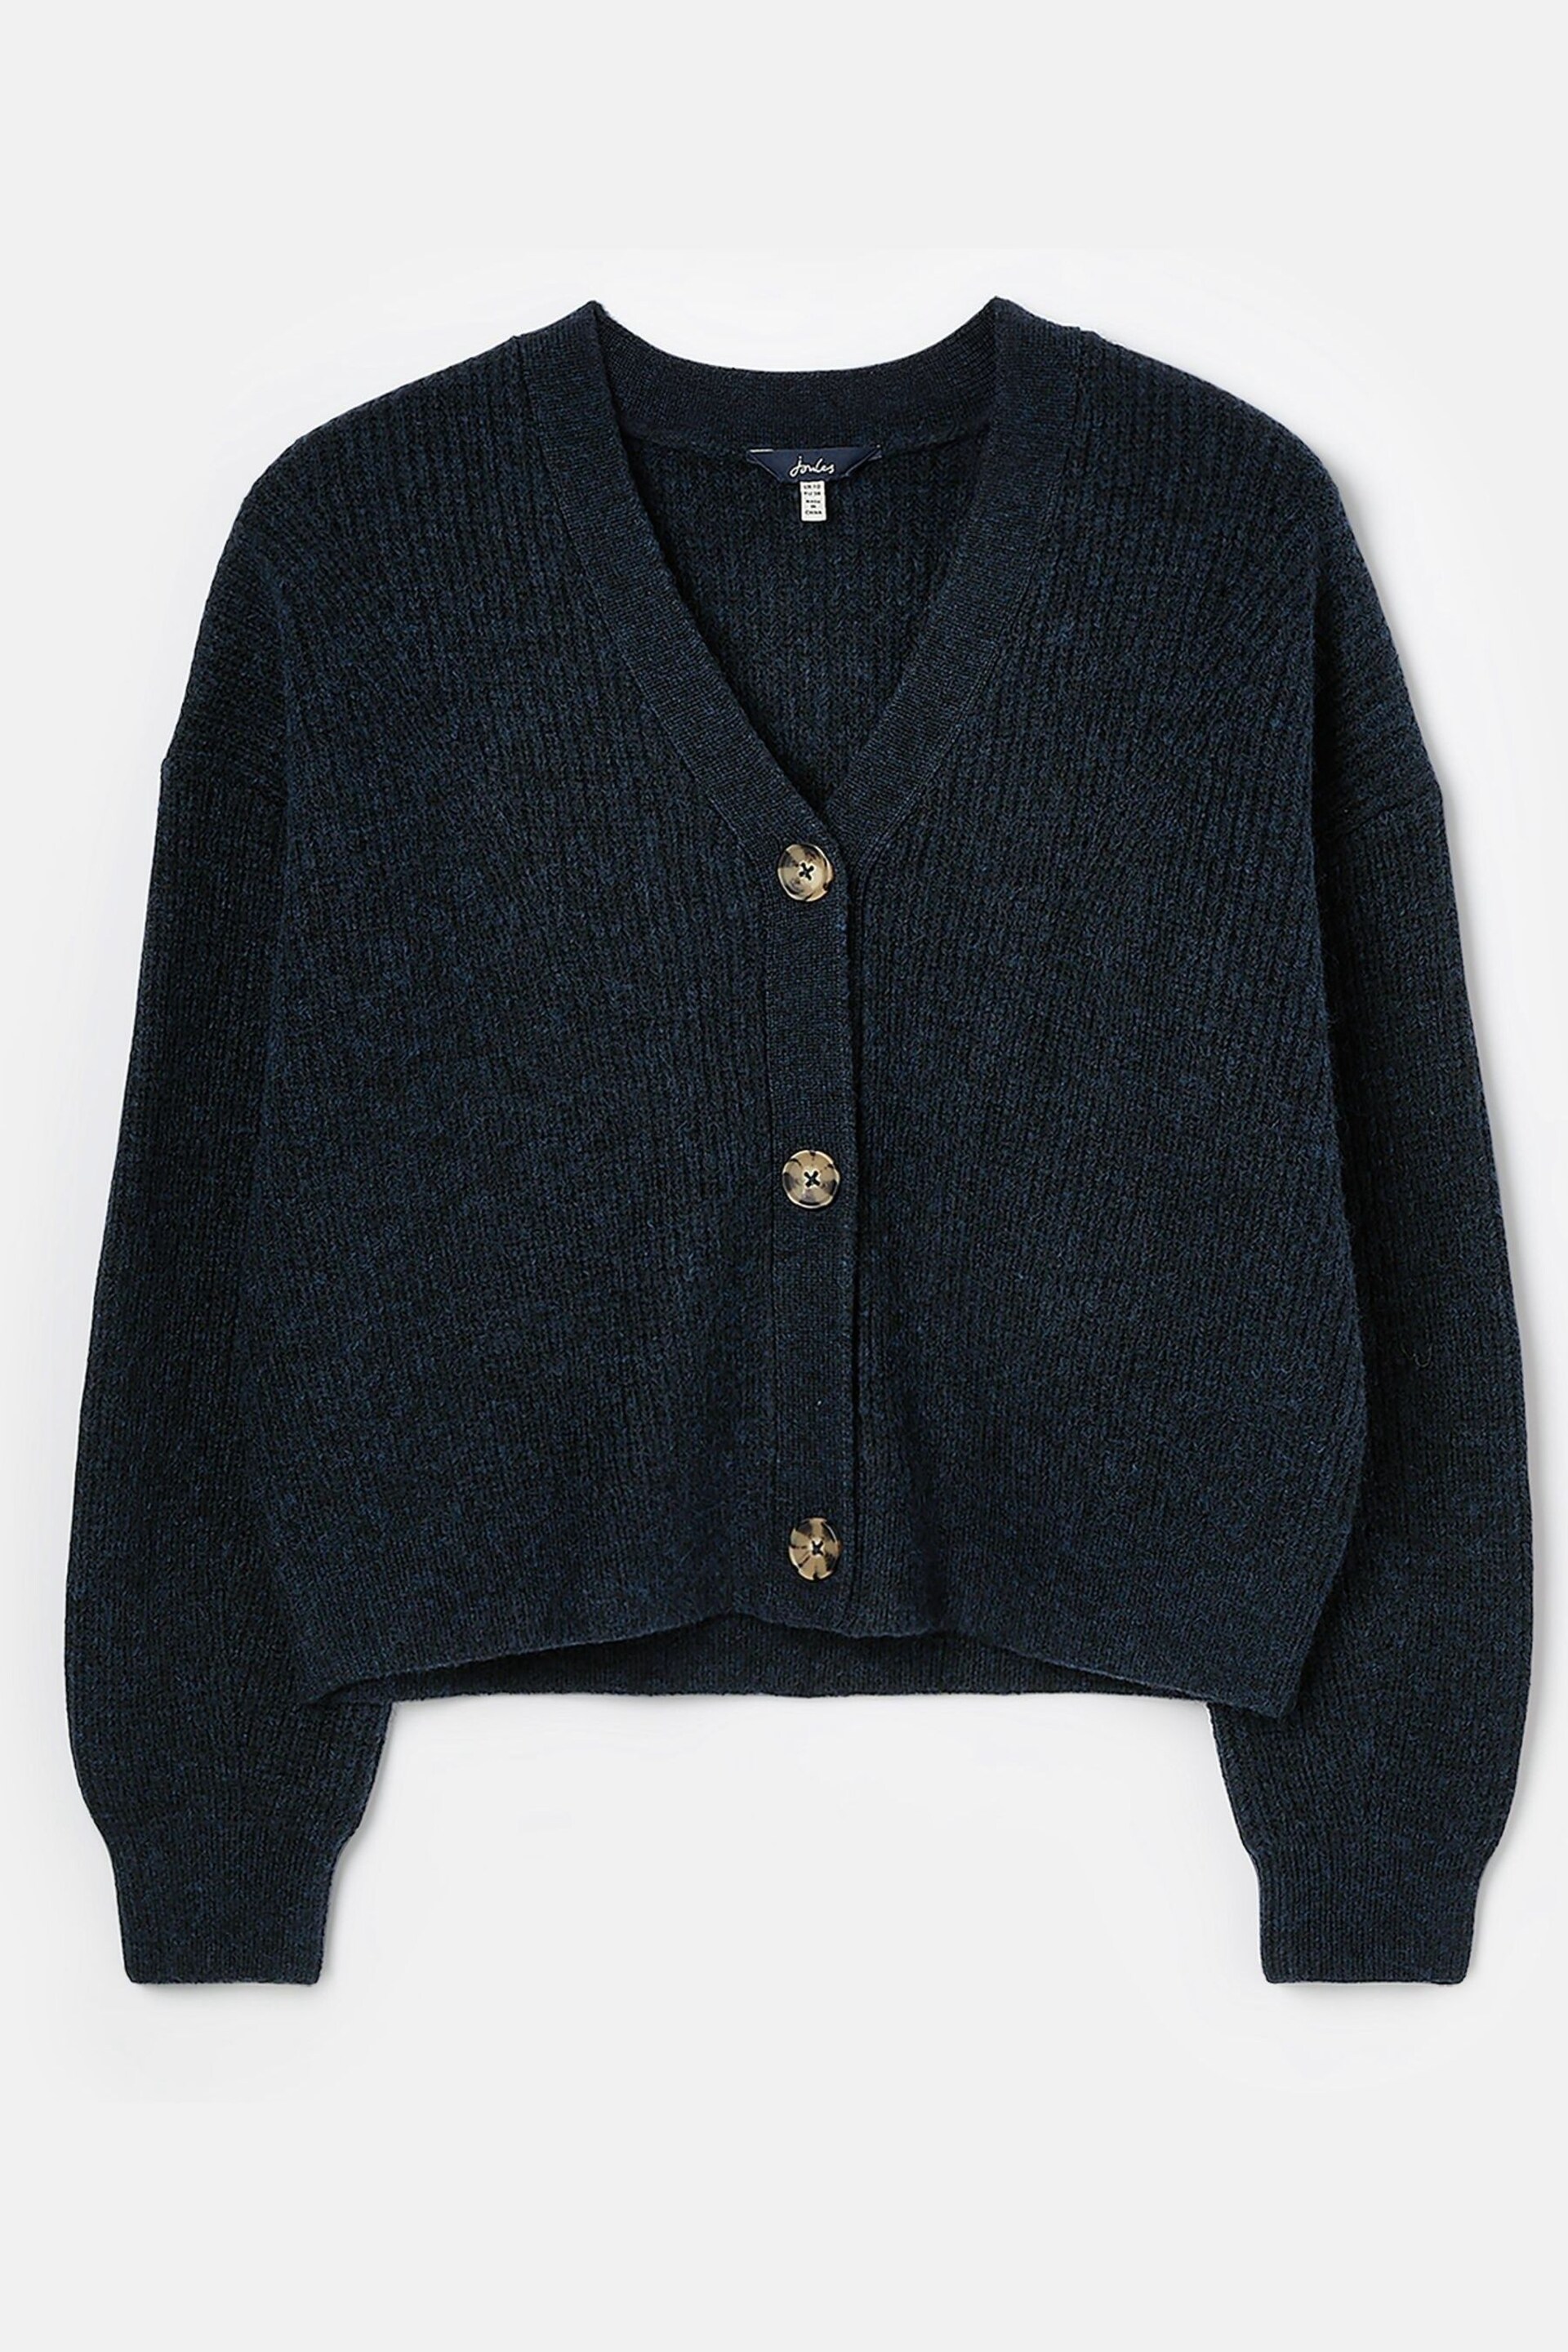 Joules Samantha Navy V Neck Ribbed Knit Buttoned Cardigan - Image 6 of 6